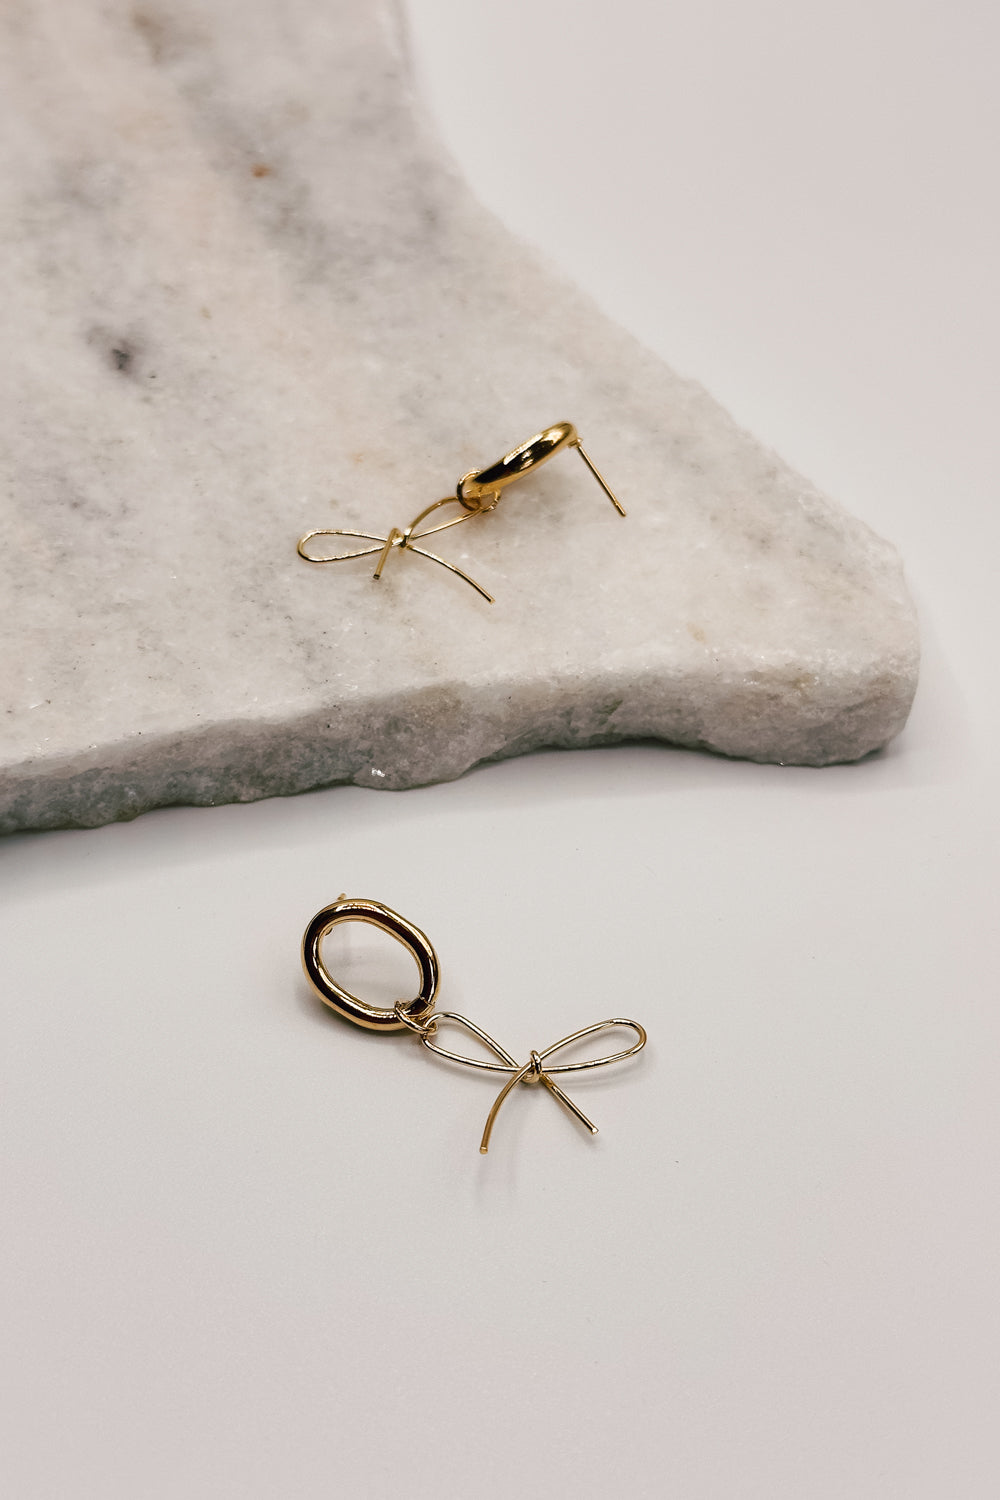 close up view of the Valeria Gold Dipped Bow Dangle Earring which features gold dipped bow shaped dangle earrings